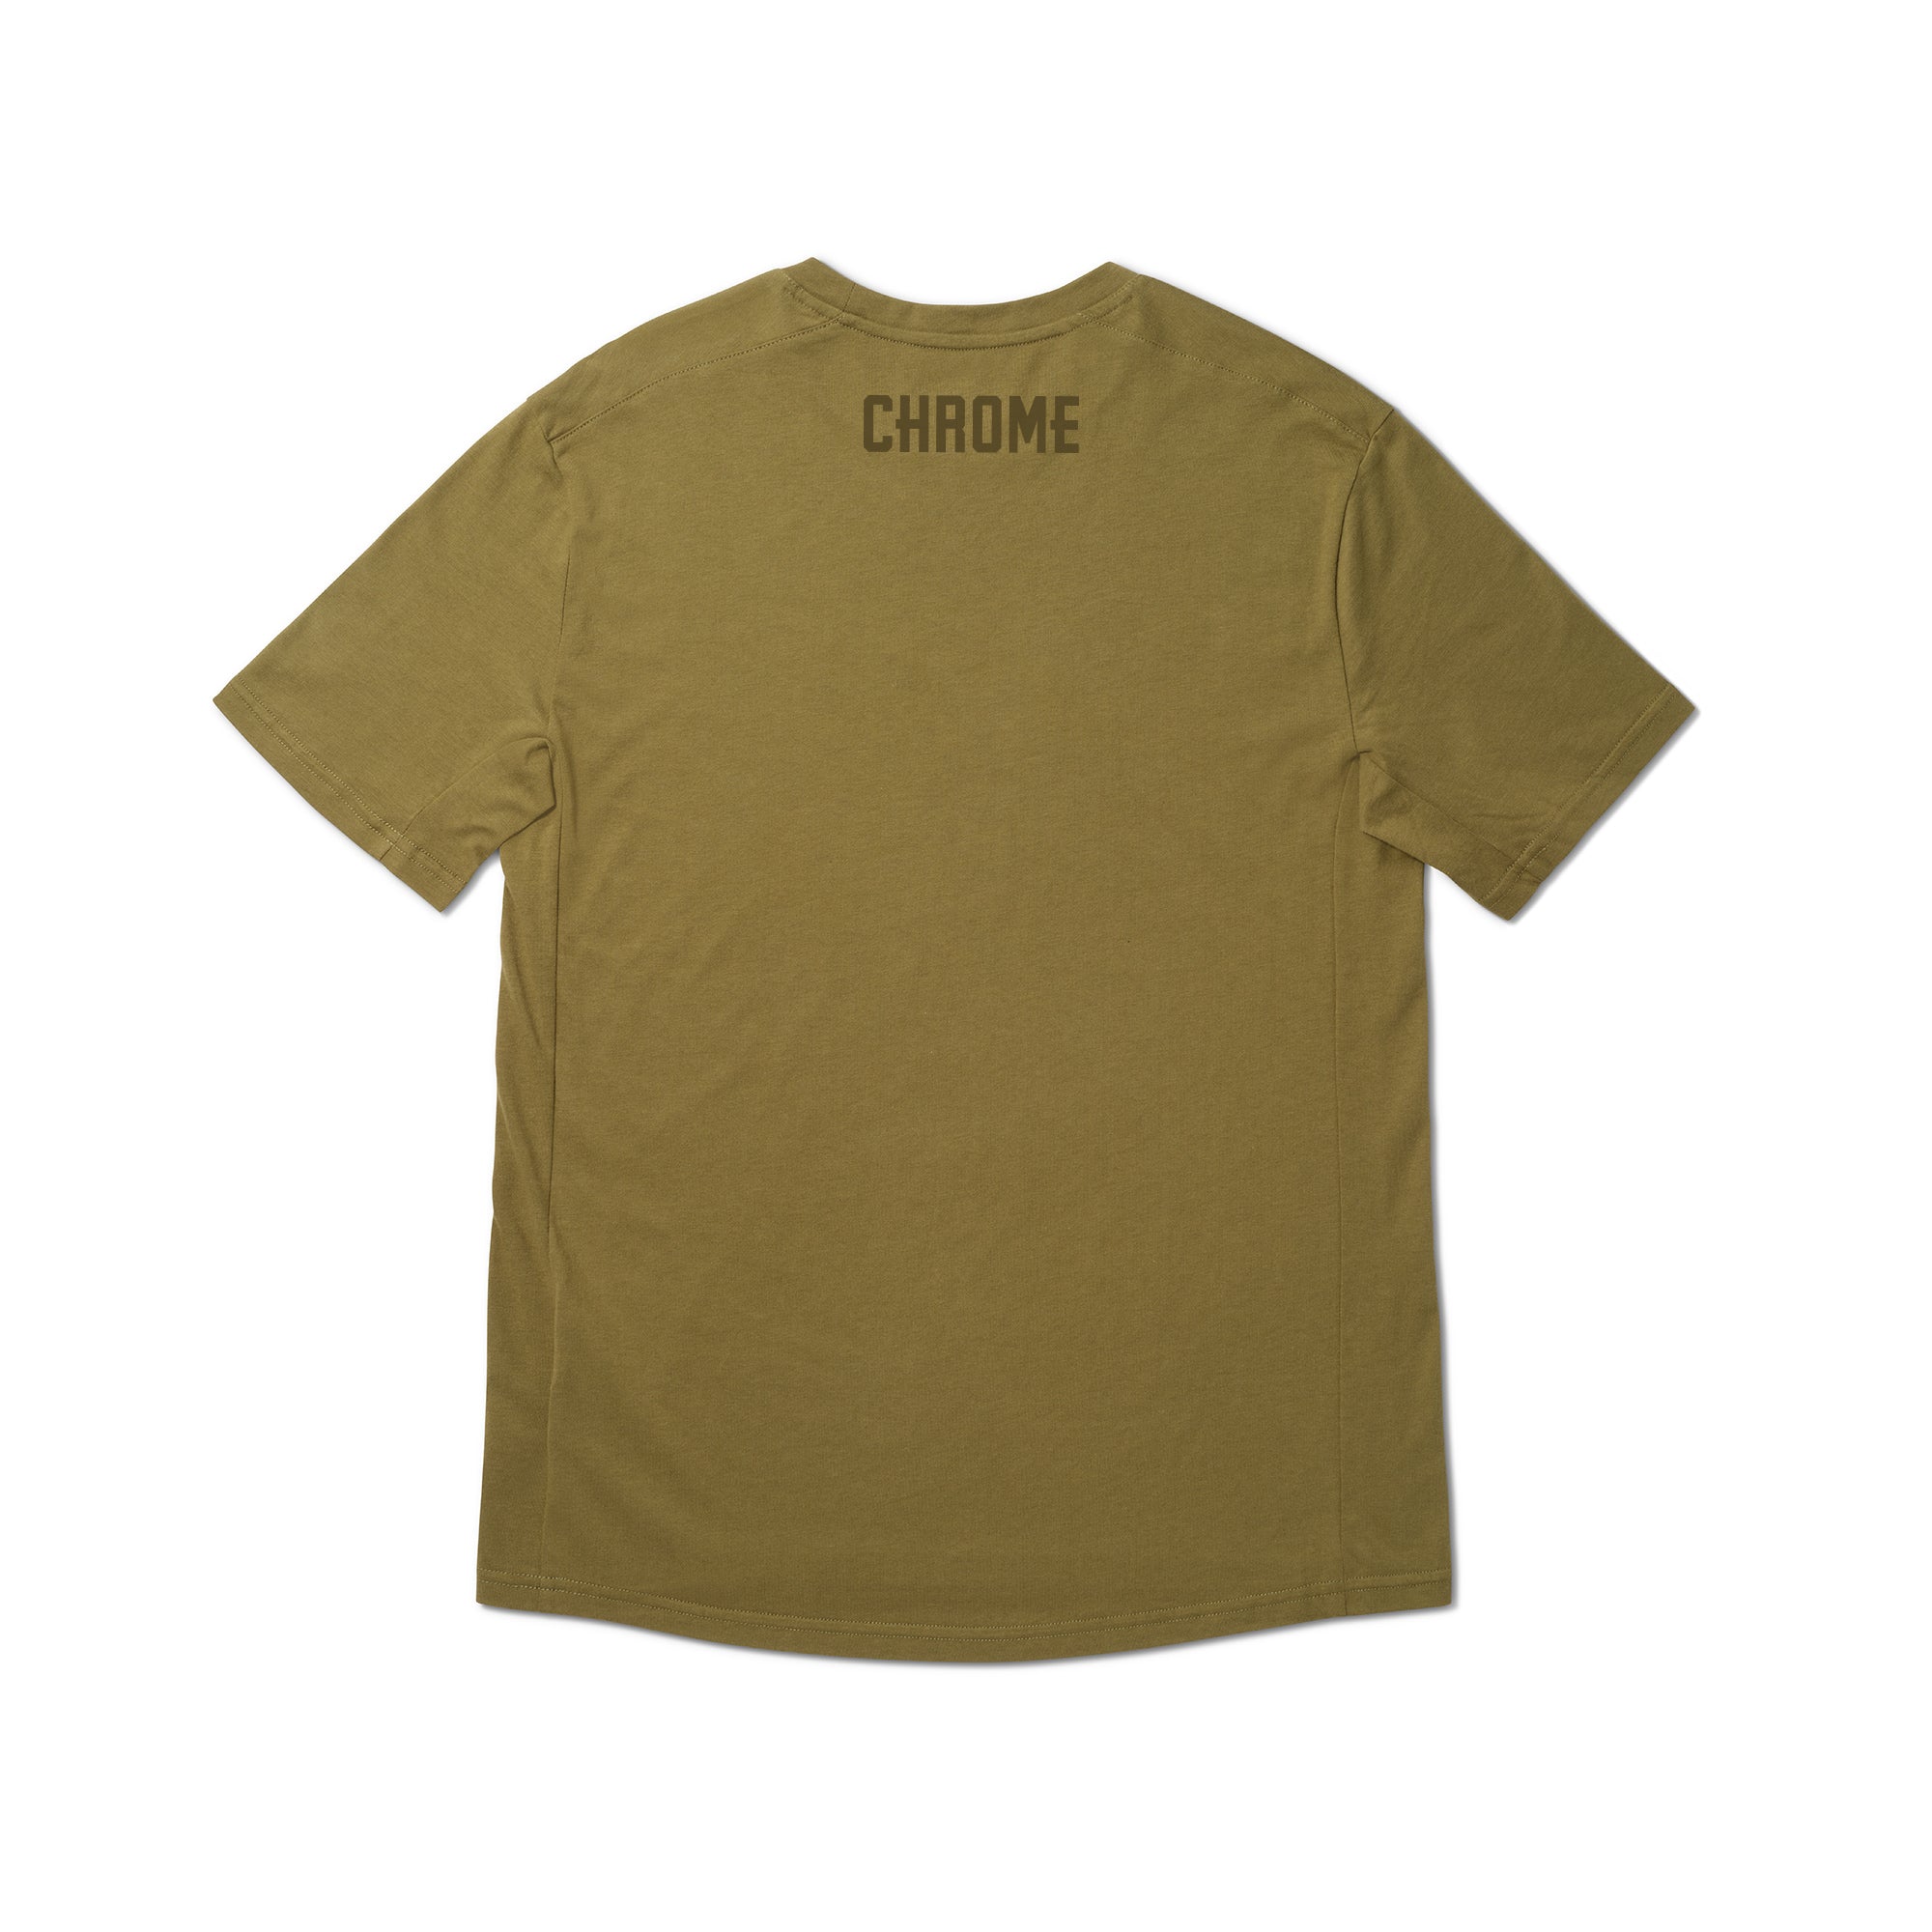 Chrome checkerboard logo tee short sleeve in green back view #color_olive branch